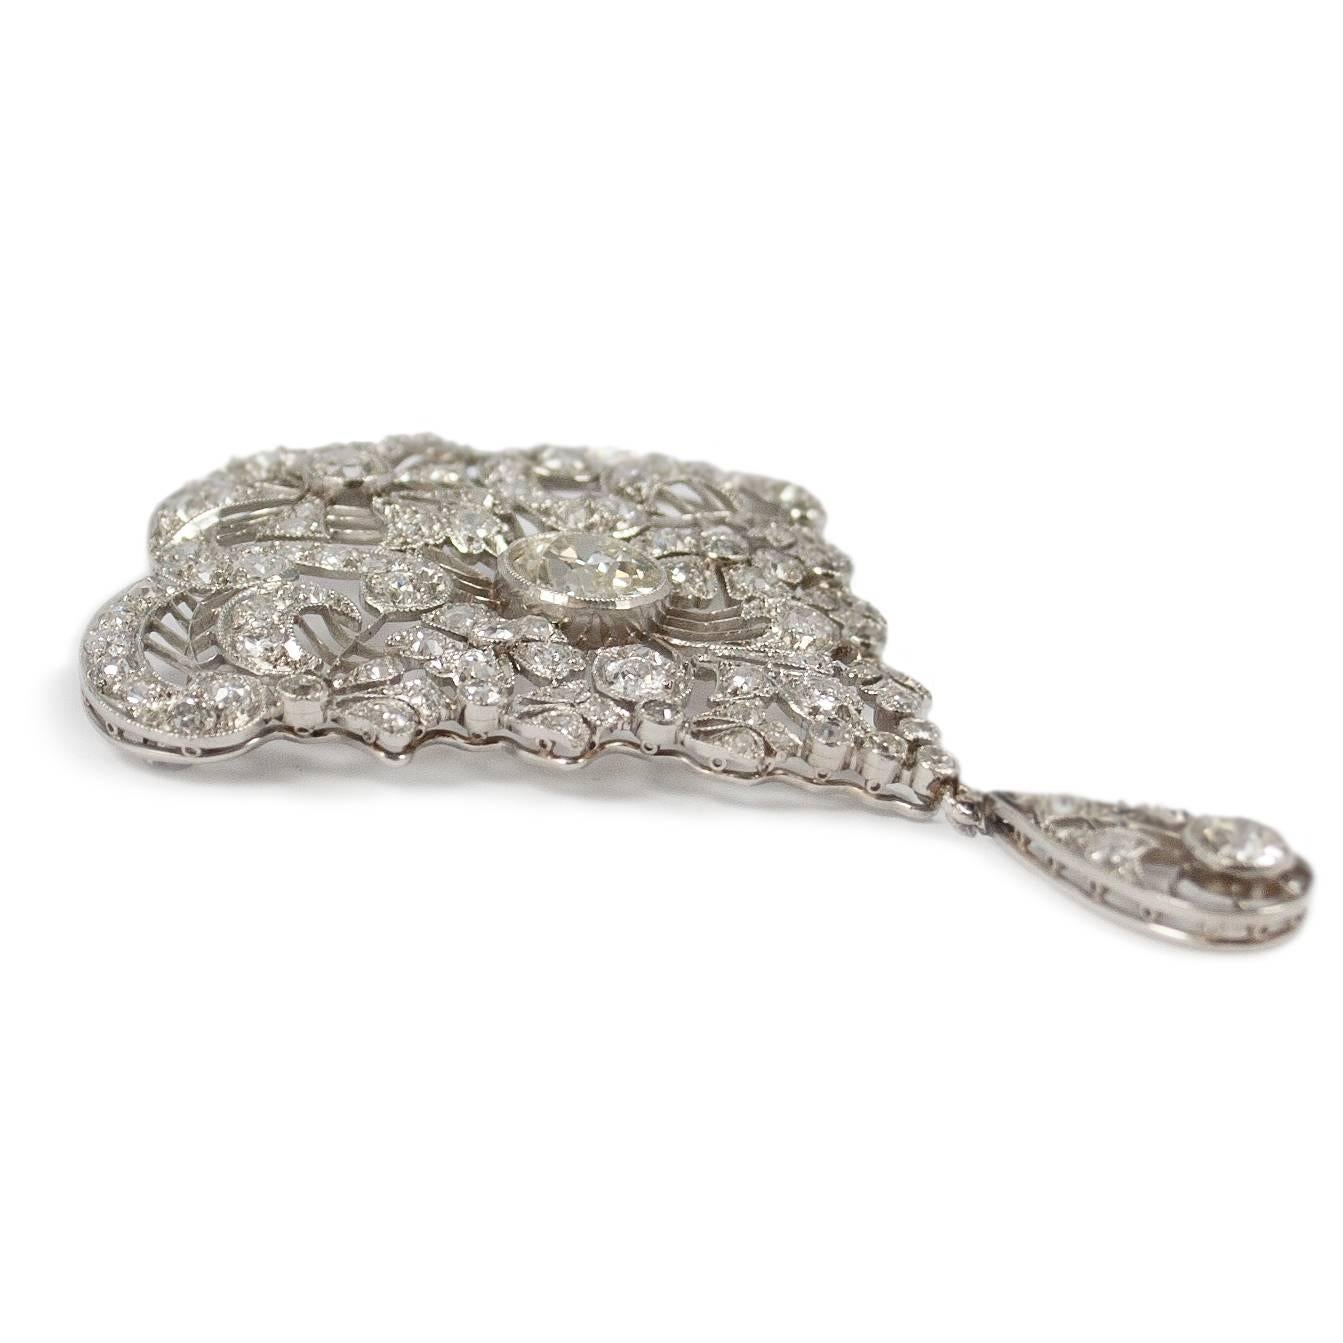 Old European Cut Antique Diamond Art Deco Pin with Round Brilliants and Floral Details